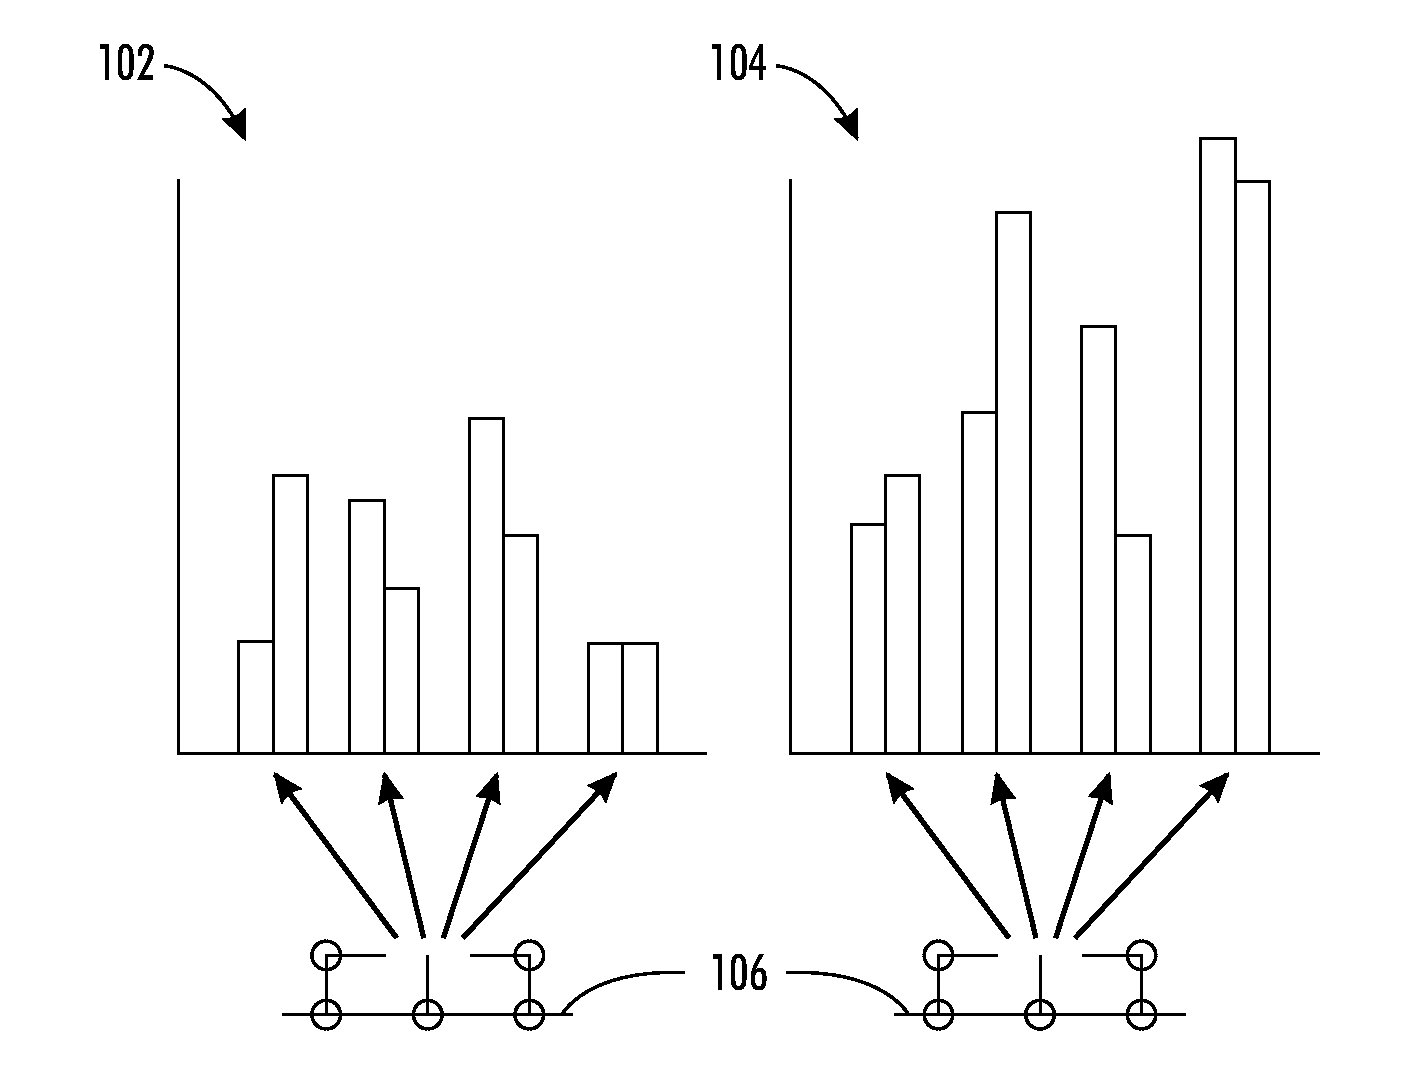 Method for generating a graph lattice from a corpus of one or more data graphs